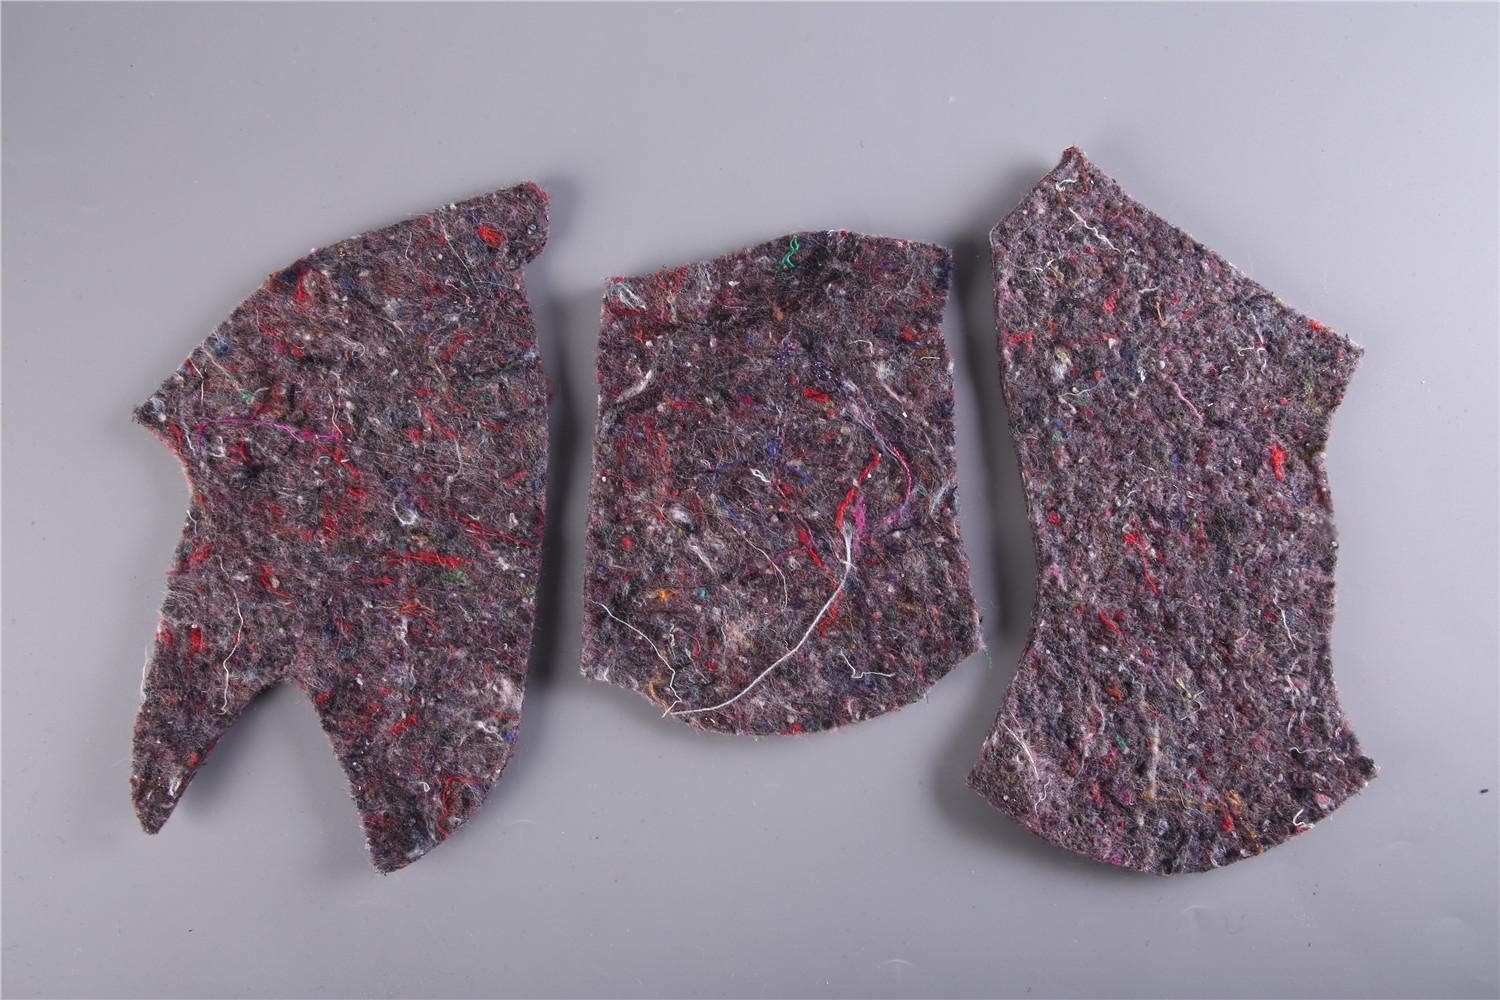 Waste felt die-cut sound-absorbing and noise-reducing material